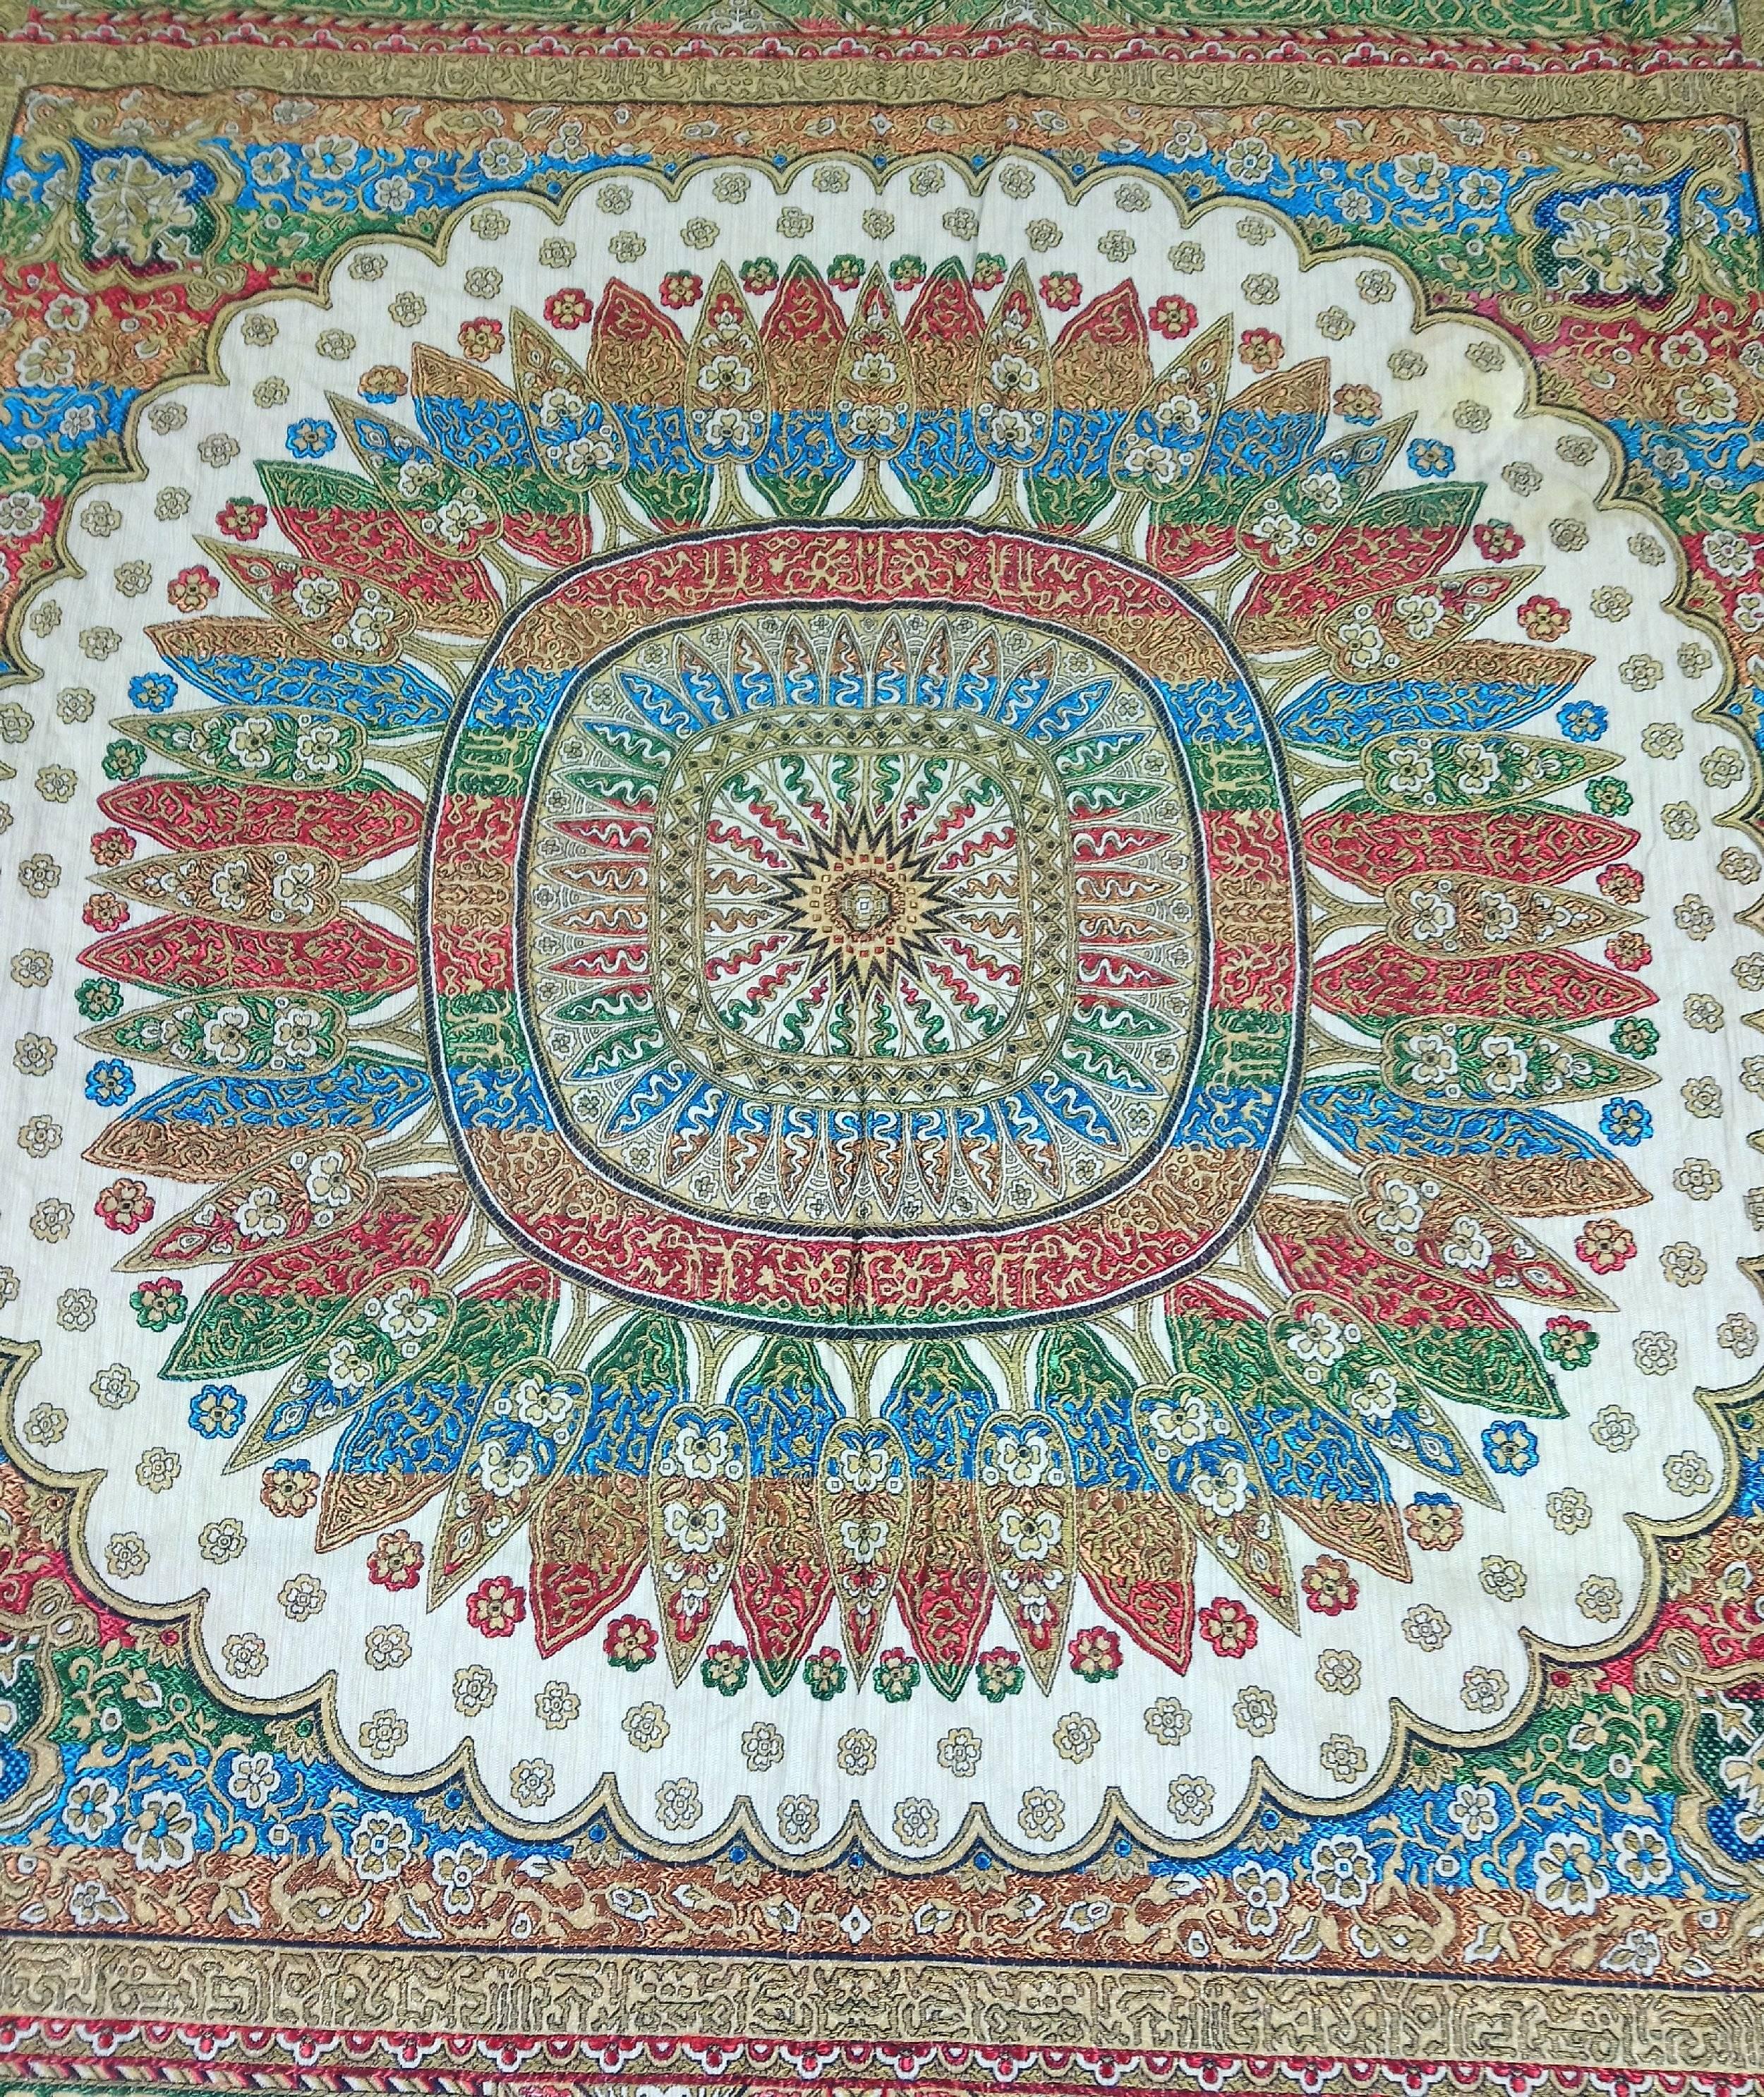 Early 20th Century Indian Worked Silk Wall Hanging or Bed Cover In Good Condition For Sale In London, west Sussex